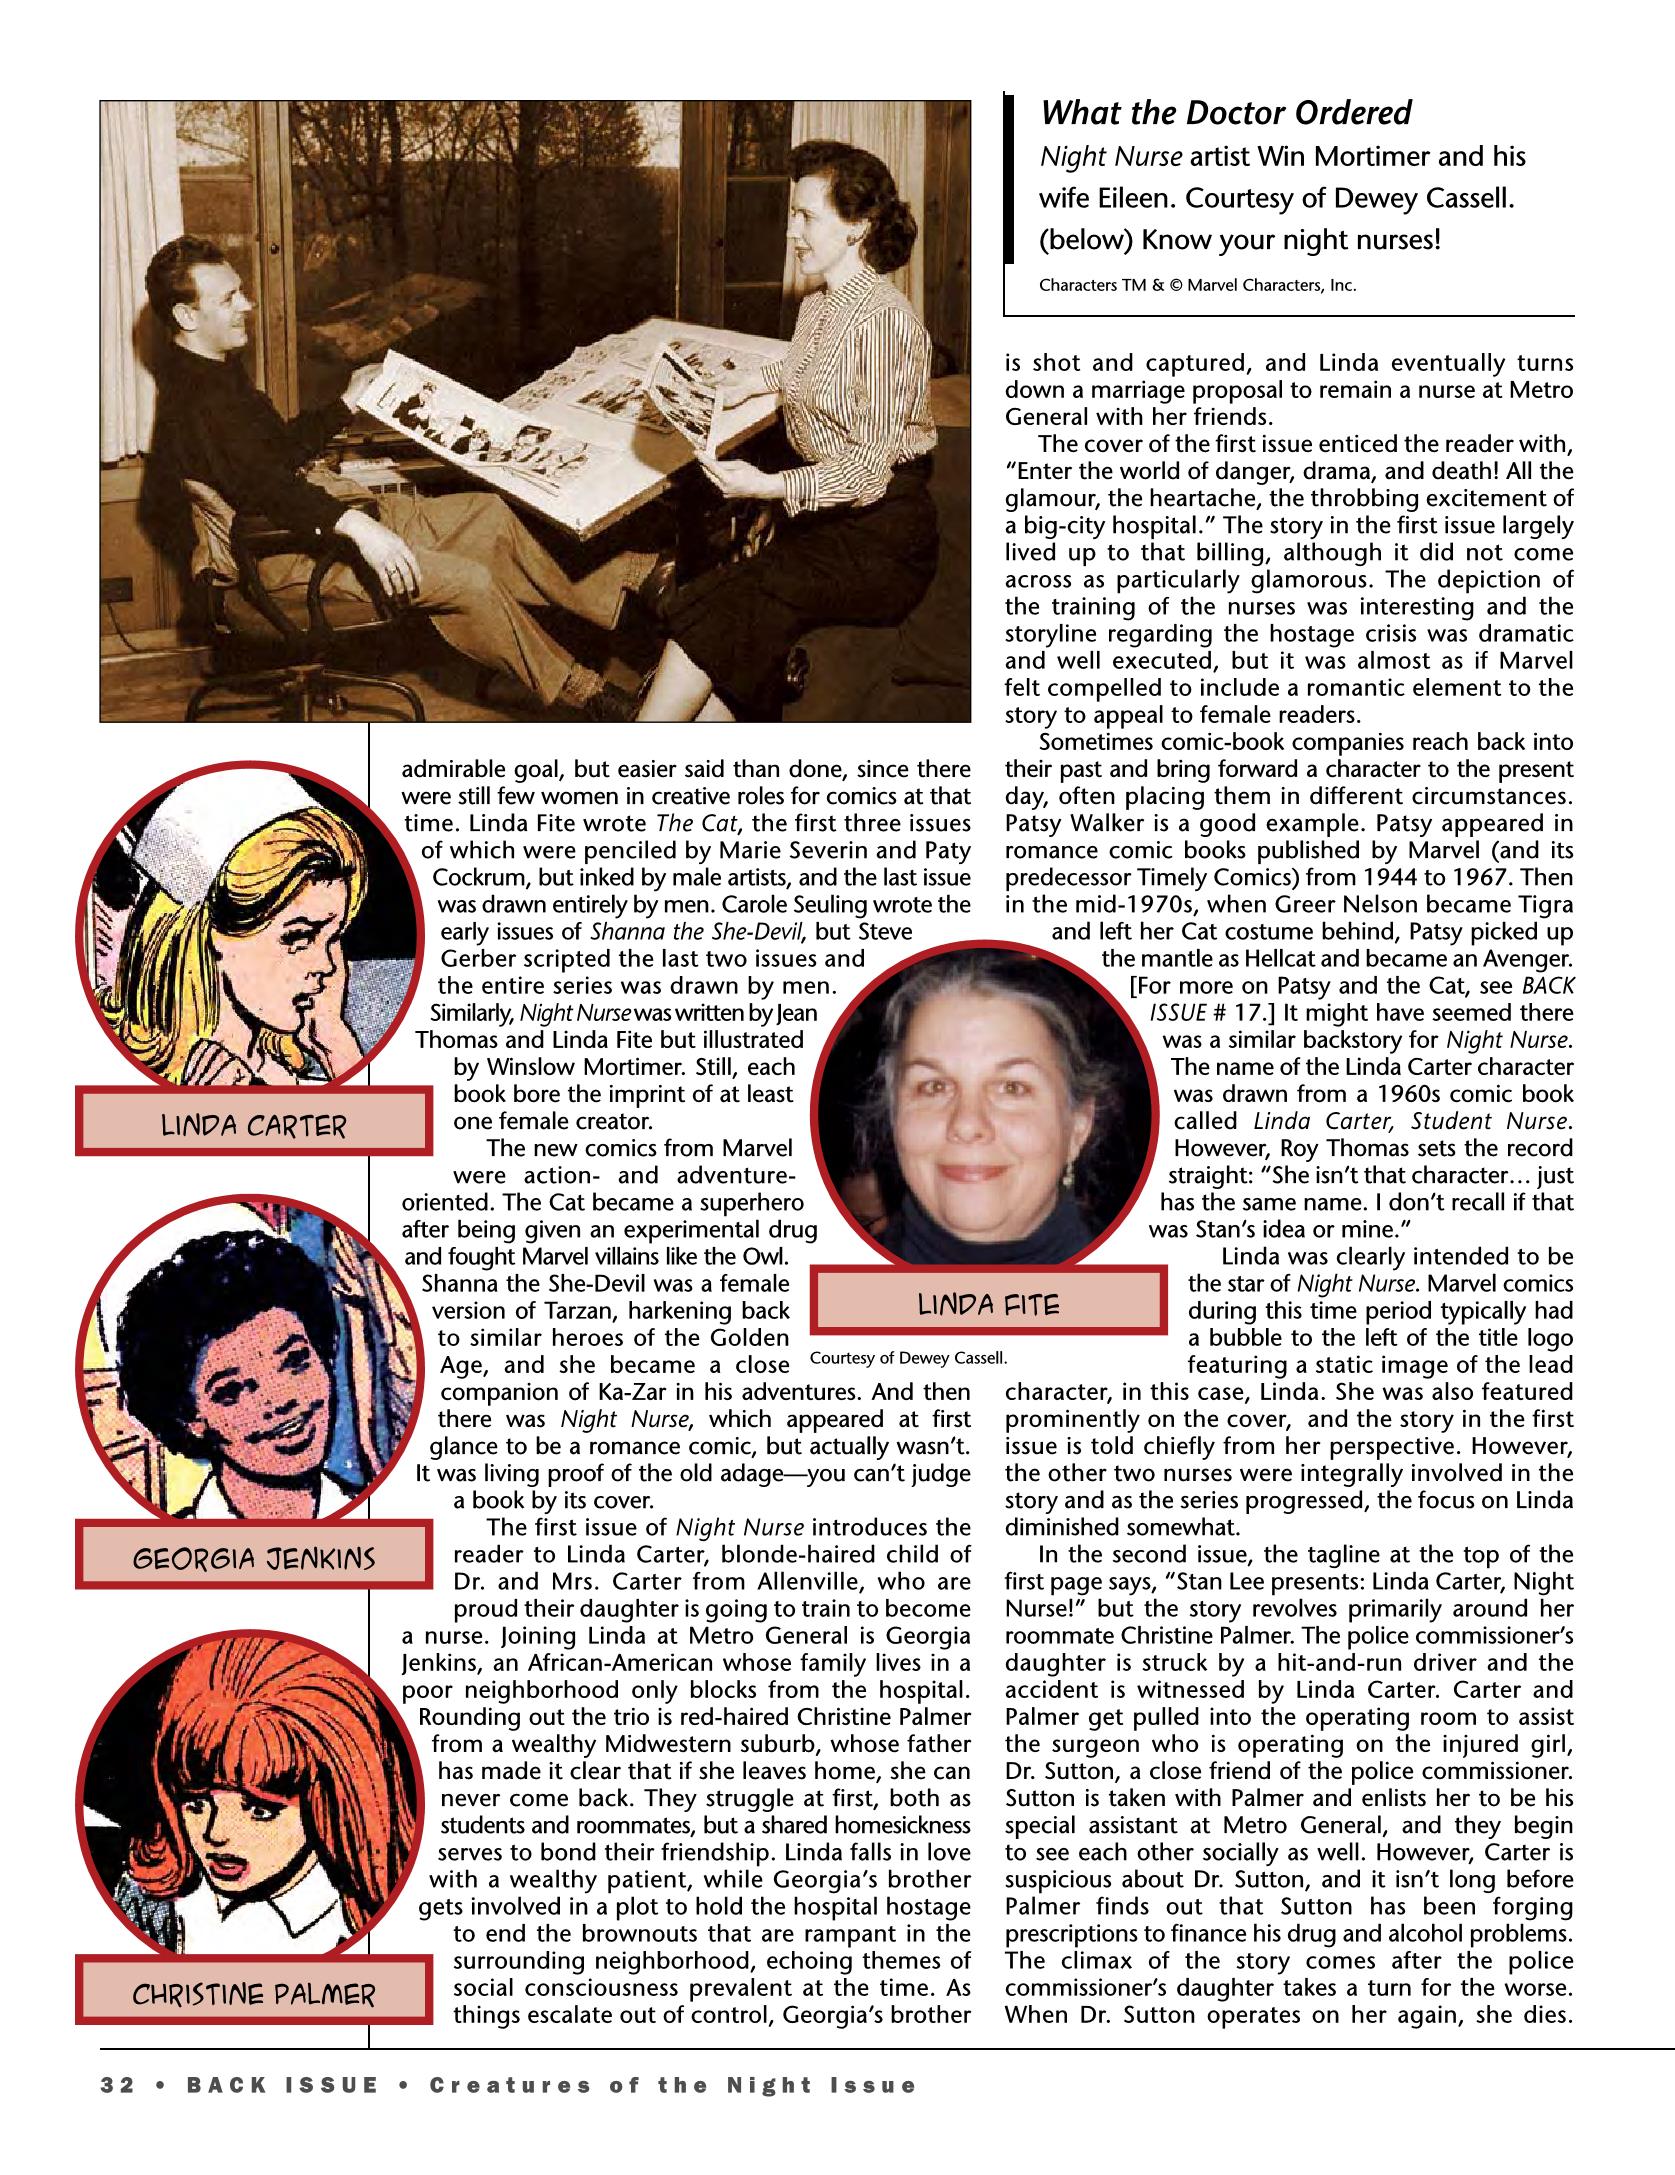 Read online Back Issue comic -  Issue #95 - 28